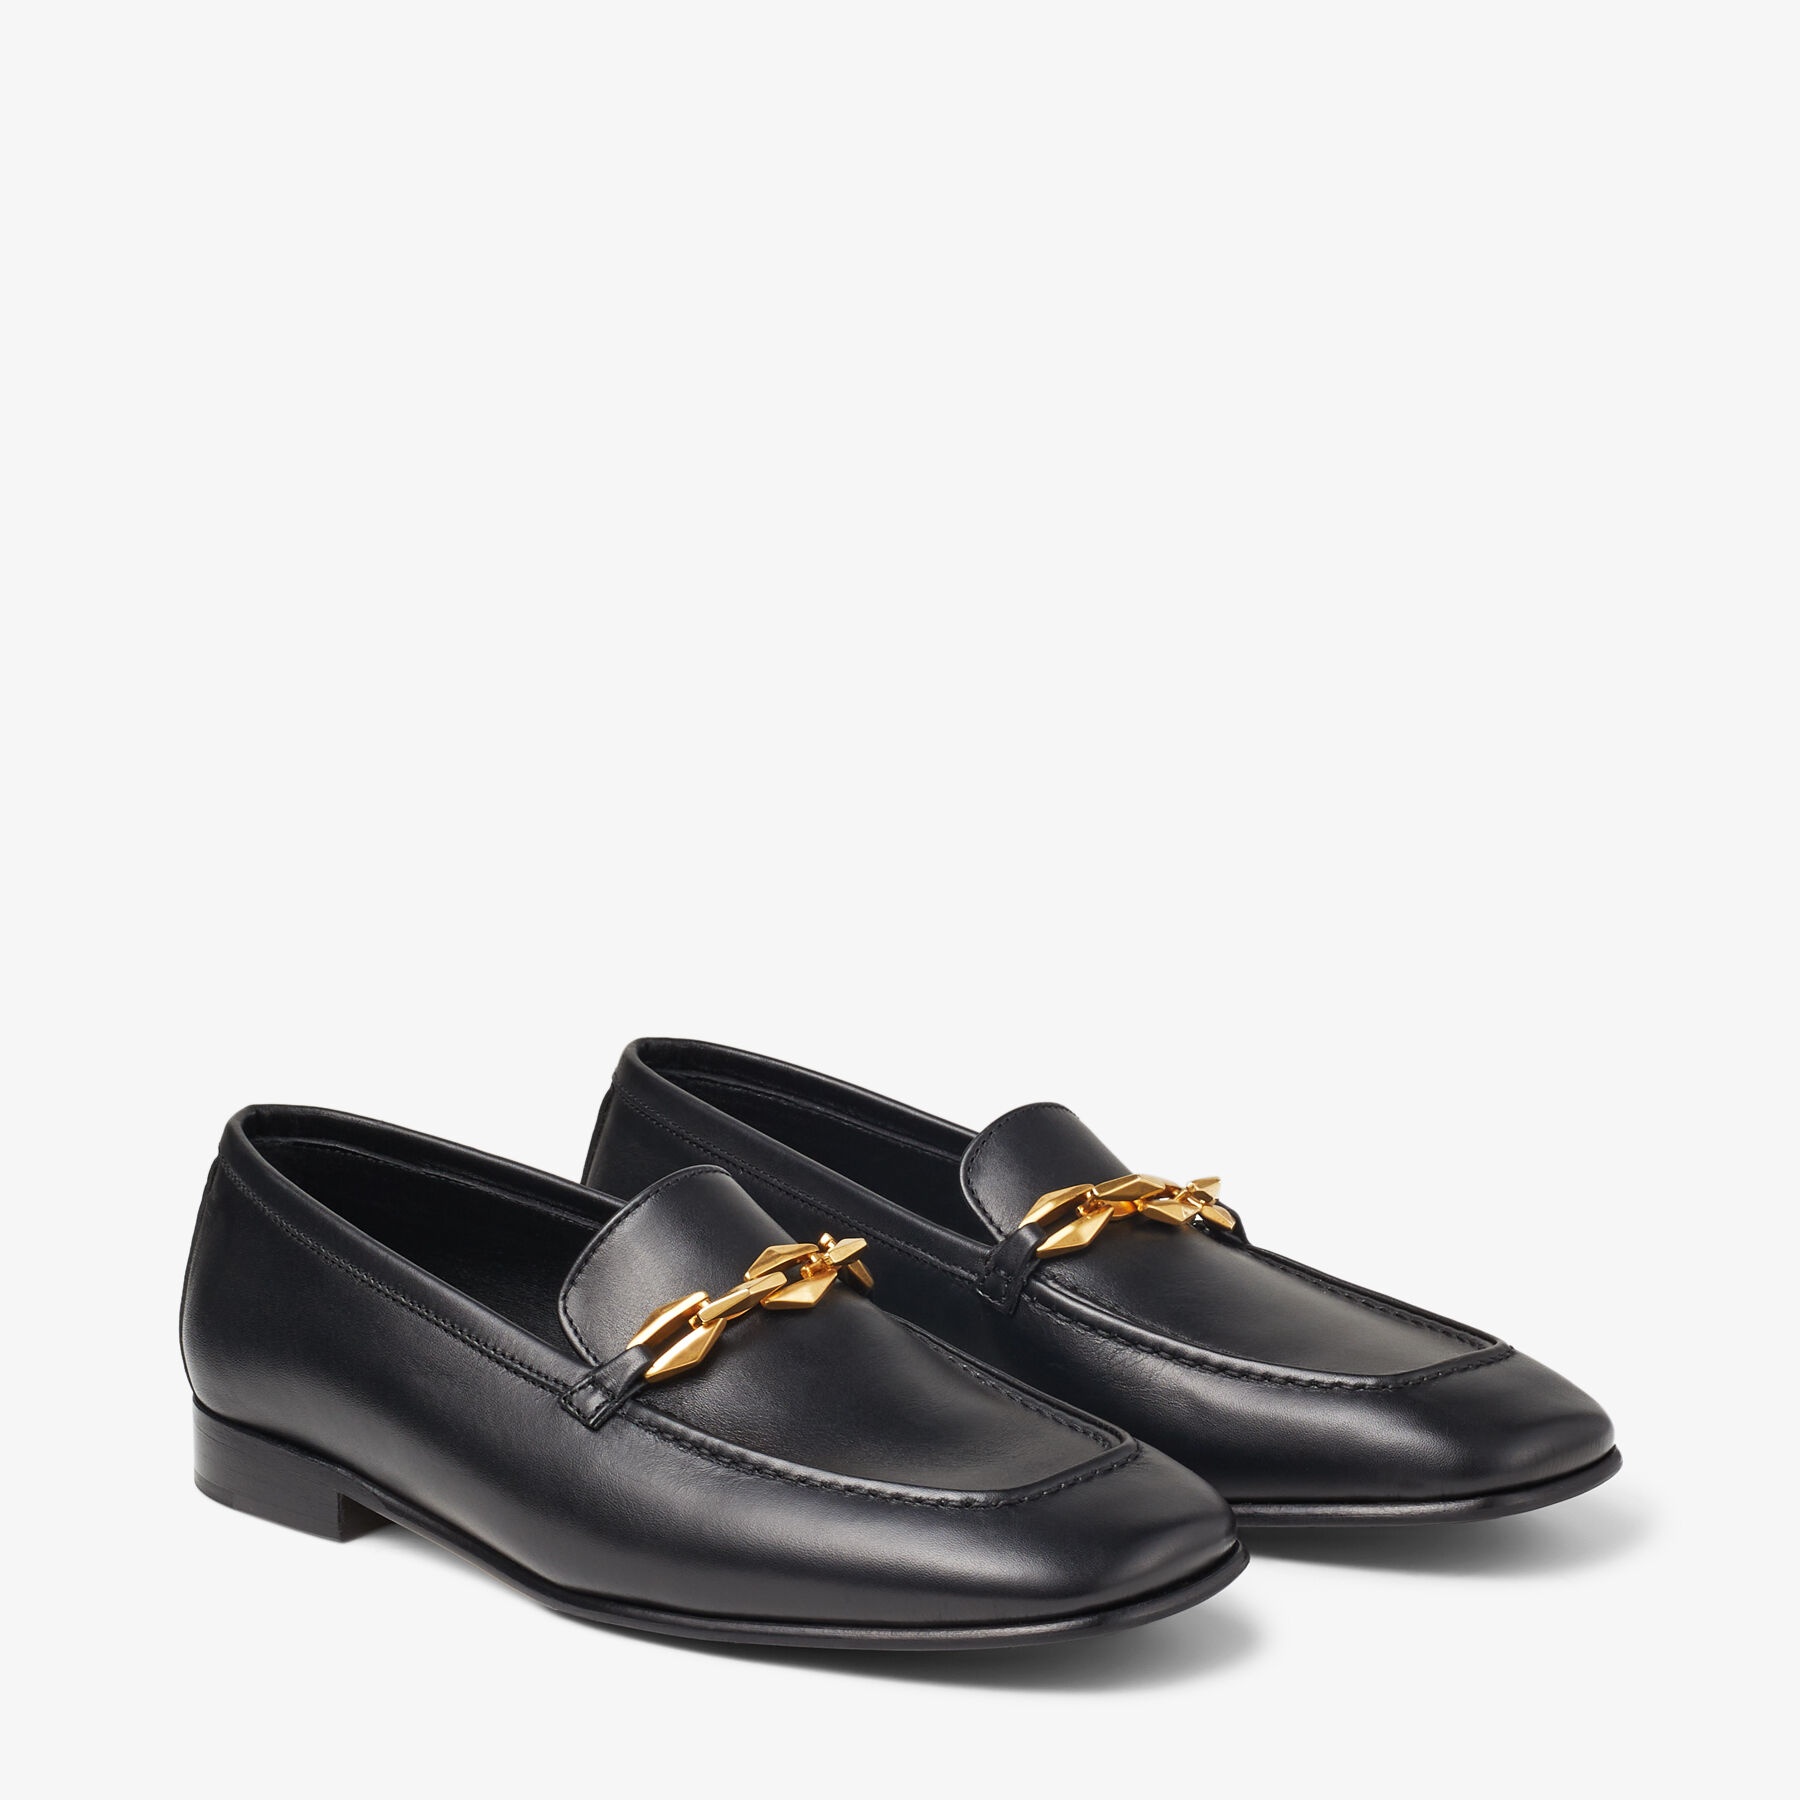 Diamond Tilda Loafer
Black Calf Leather Loafers with Chain Embellishment - 3